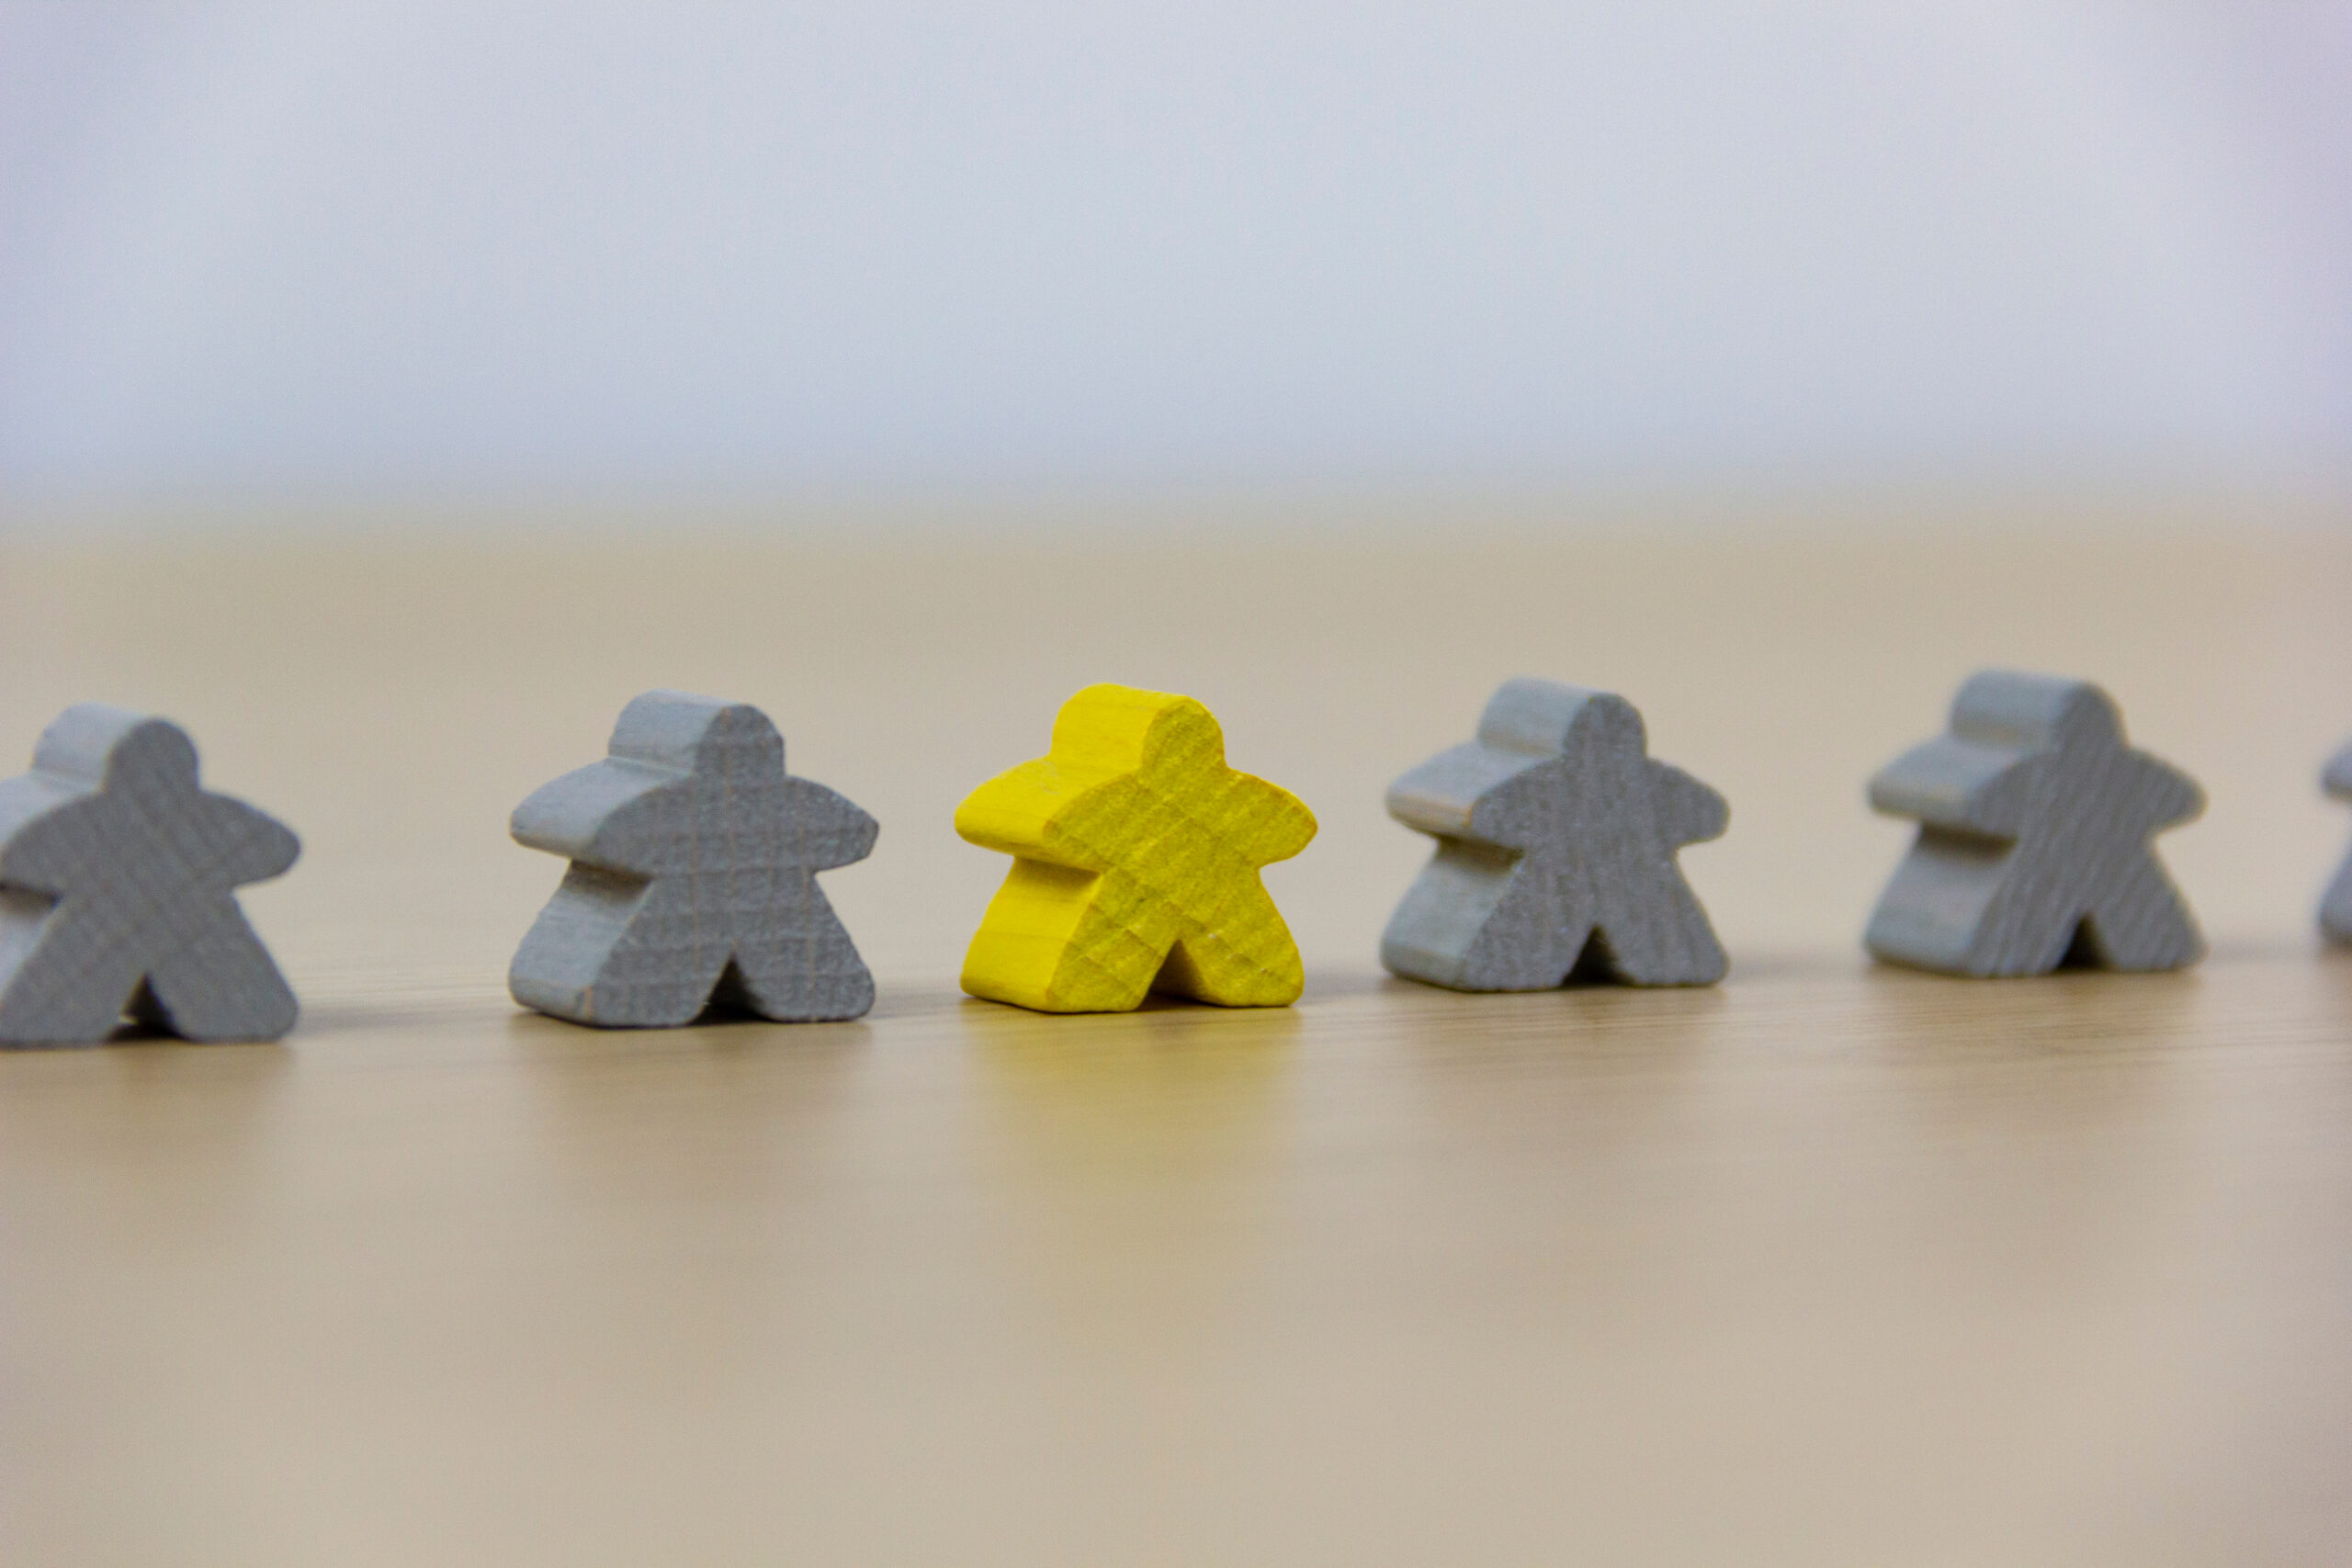 Several grey wooden meeple figures standing in a row on a light wooden surface with one distinct, bright yellow meeple figure in the center, symbolizing leadership, individuality, or standing out in a team.